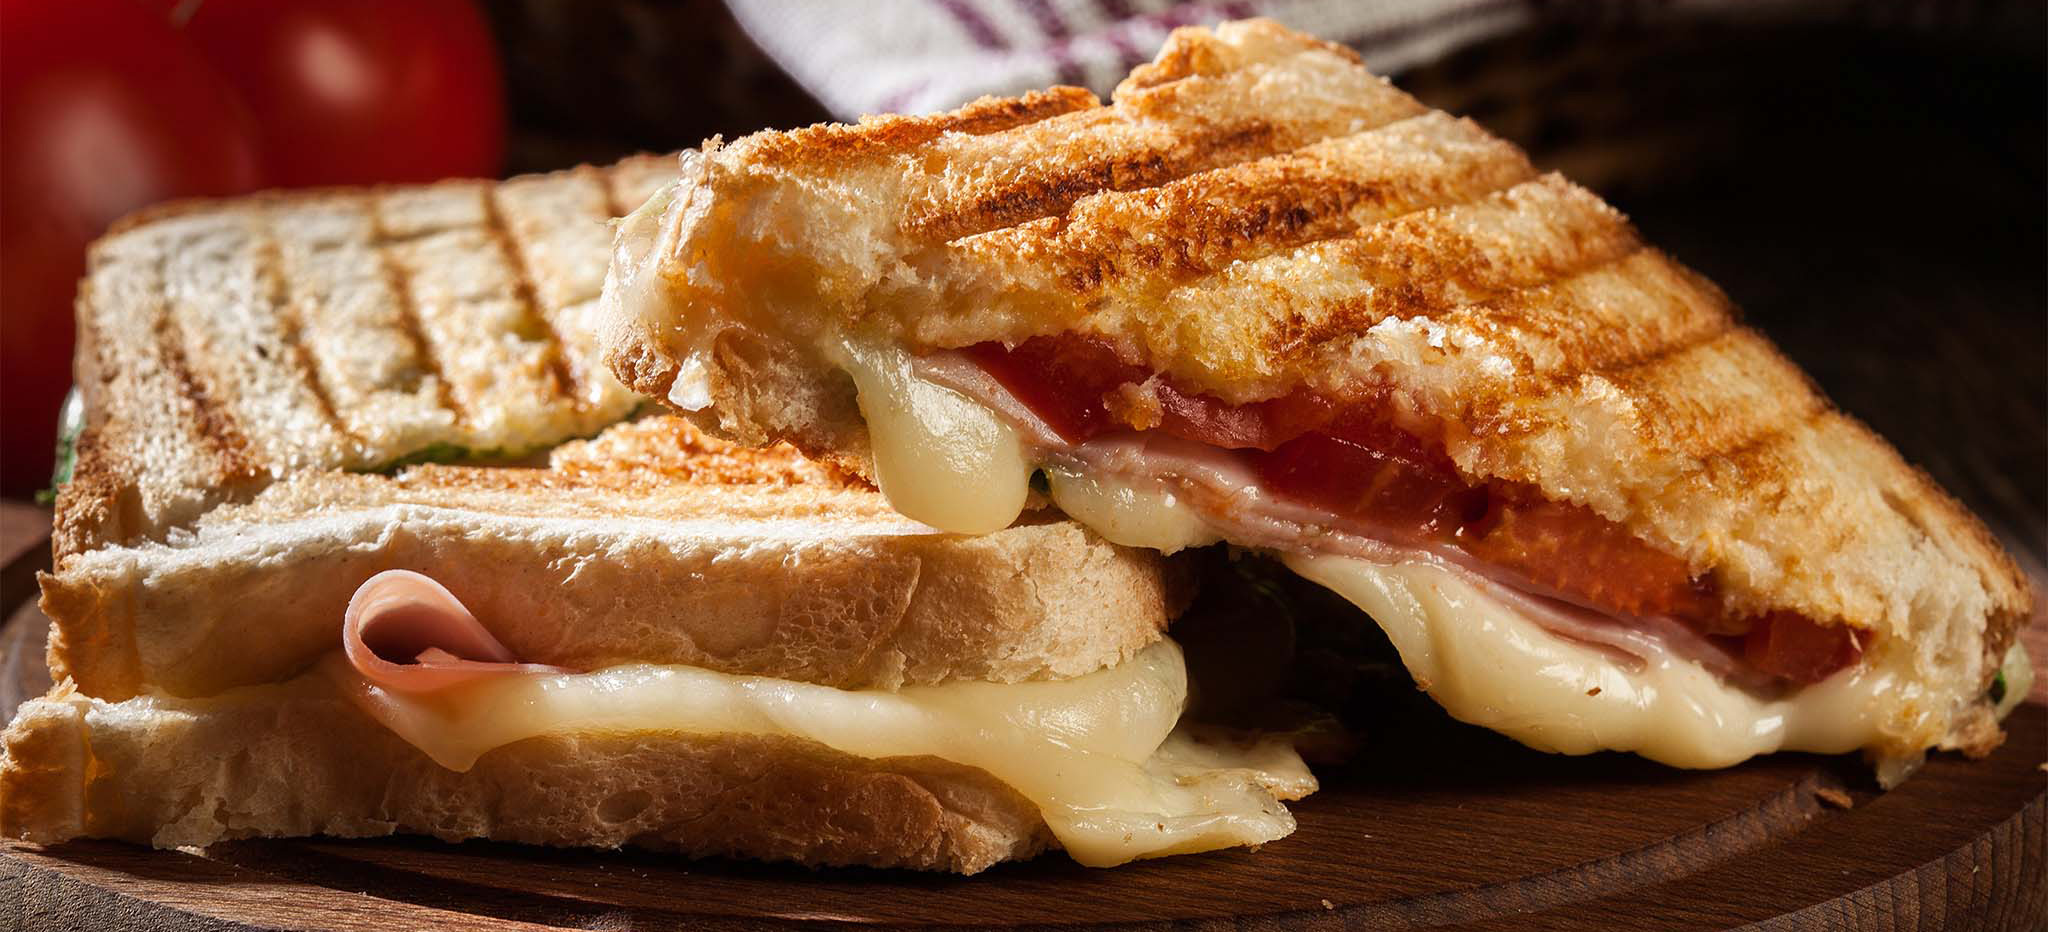 Ham and cheese melt sandwich is very popular, specially by kids and families.